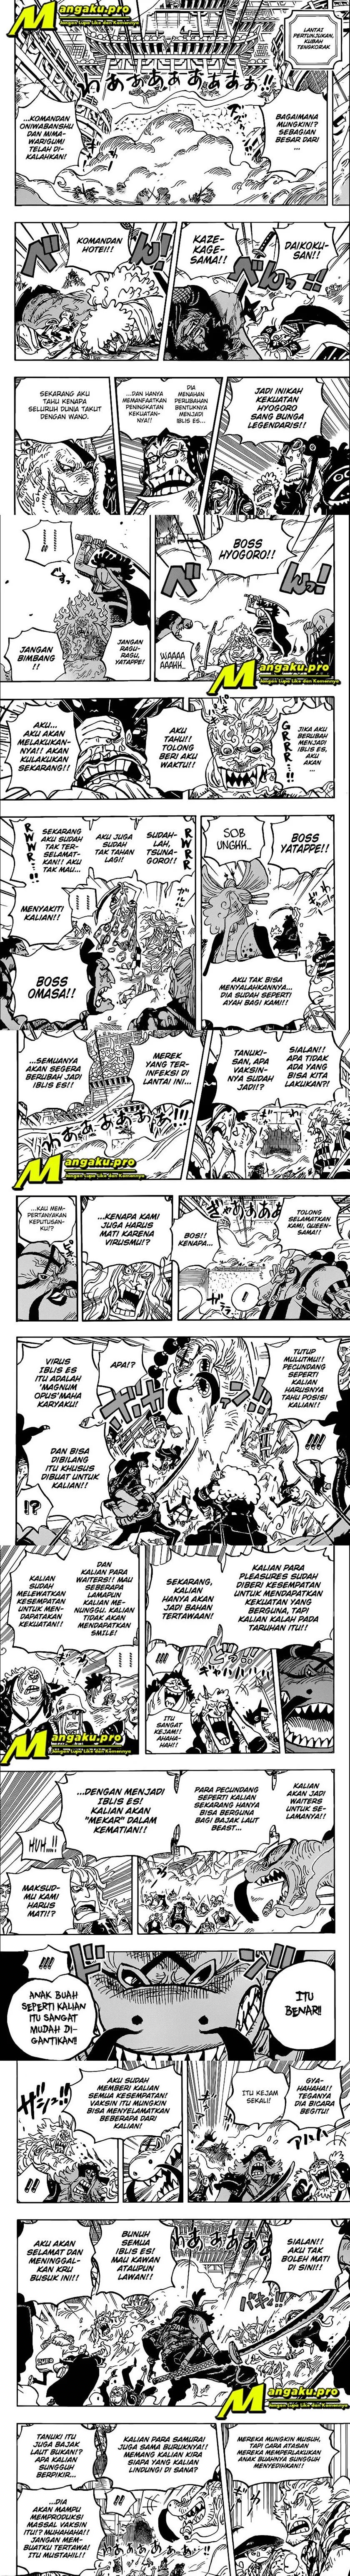 One Piece Chapter 1007